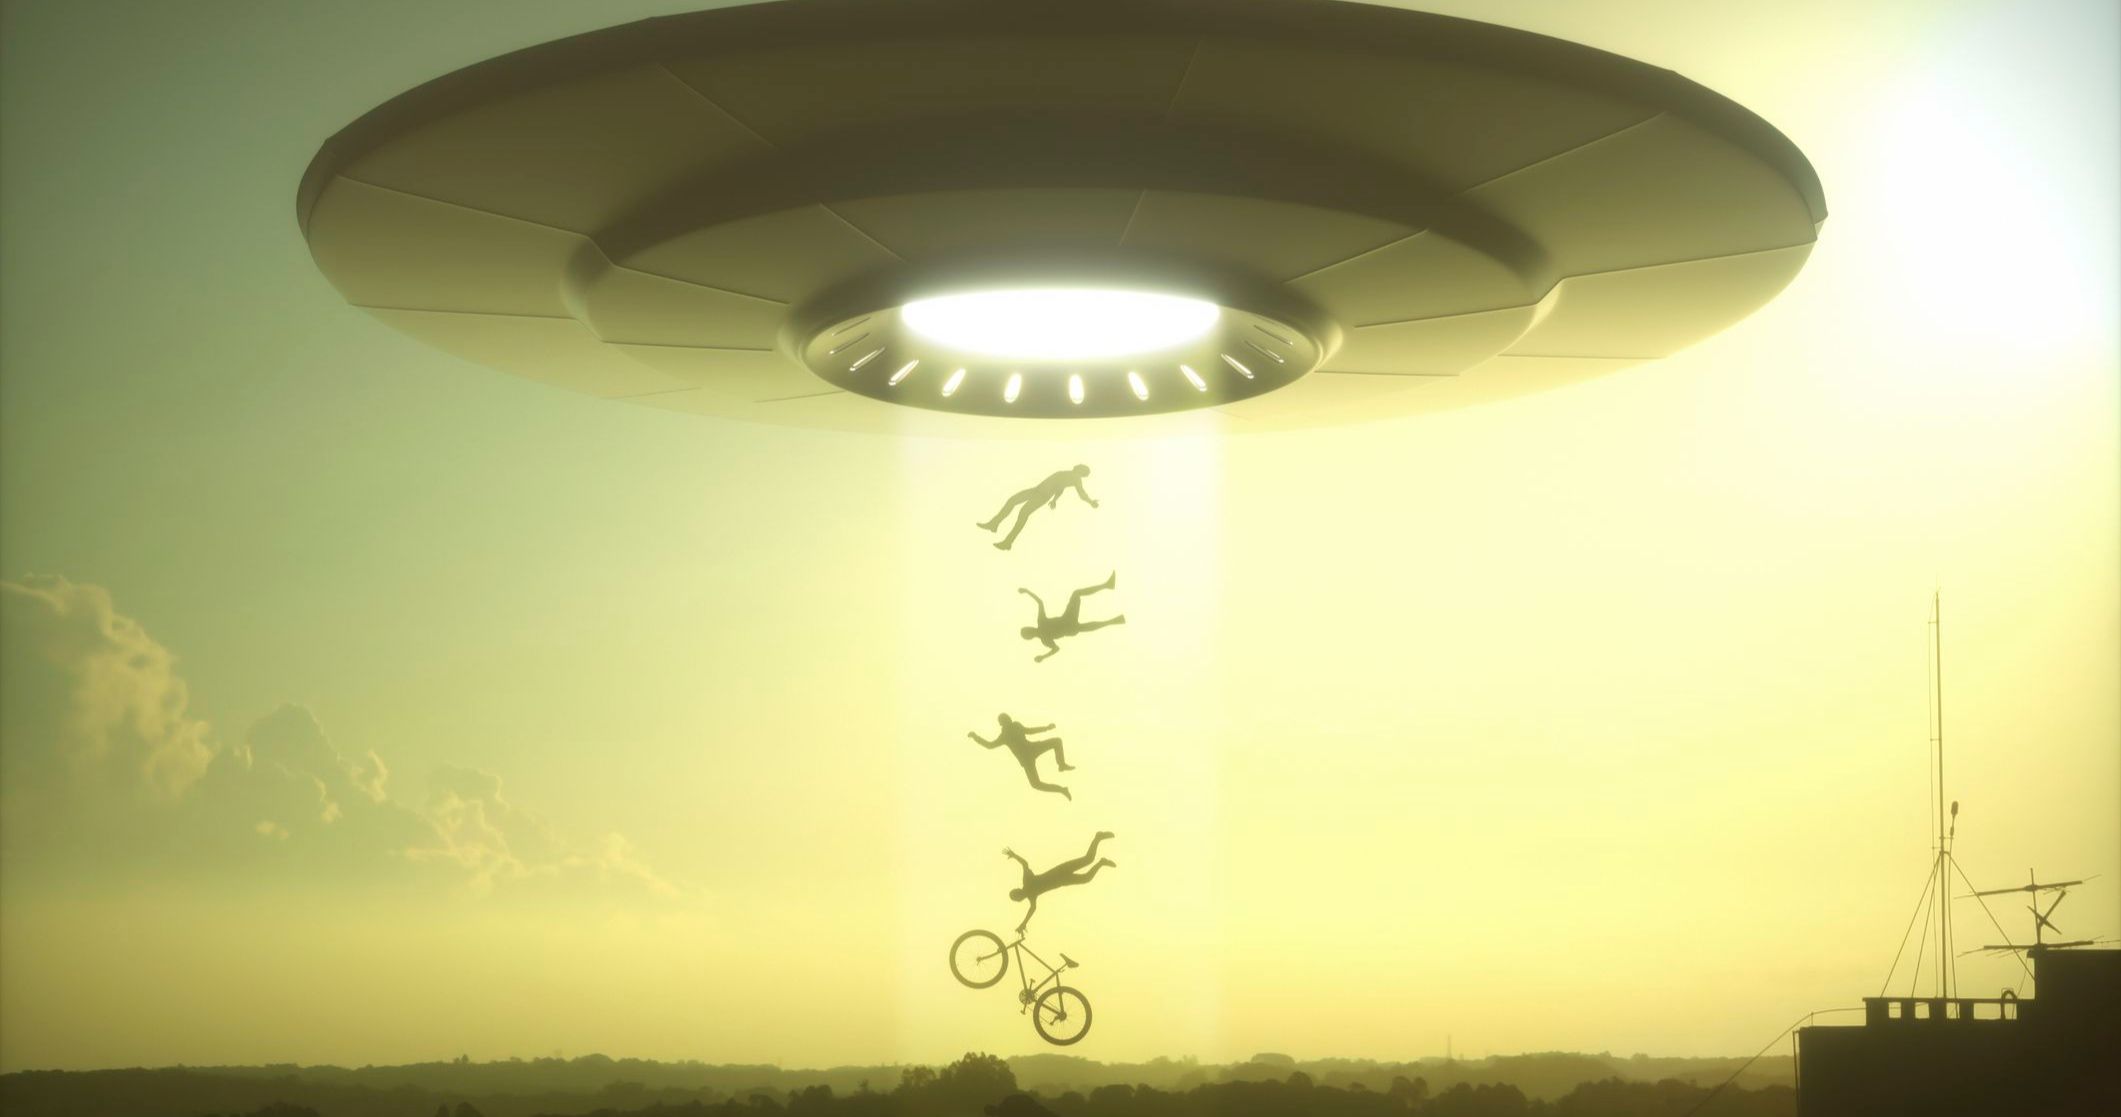 Alien Abduction Insurance Policies Surge Ahead of Storm Area 51